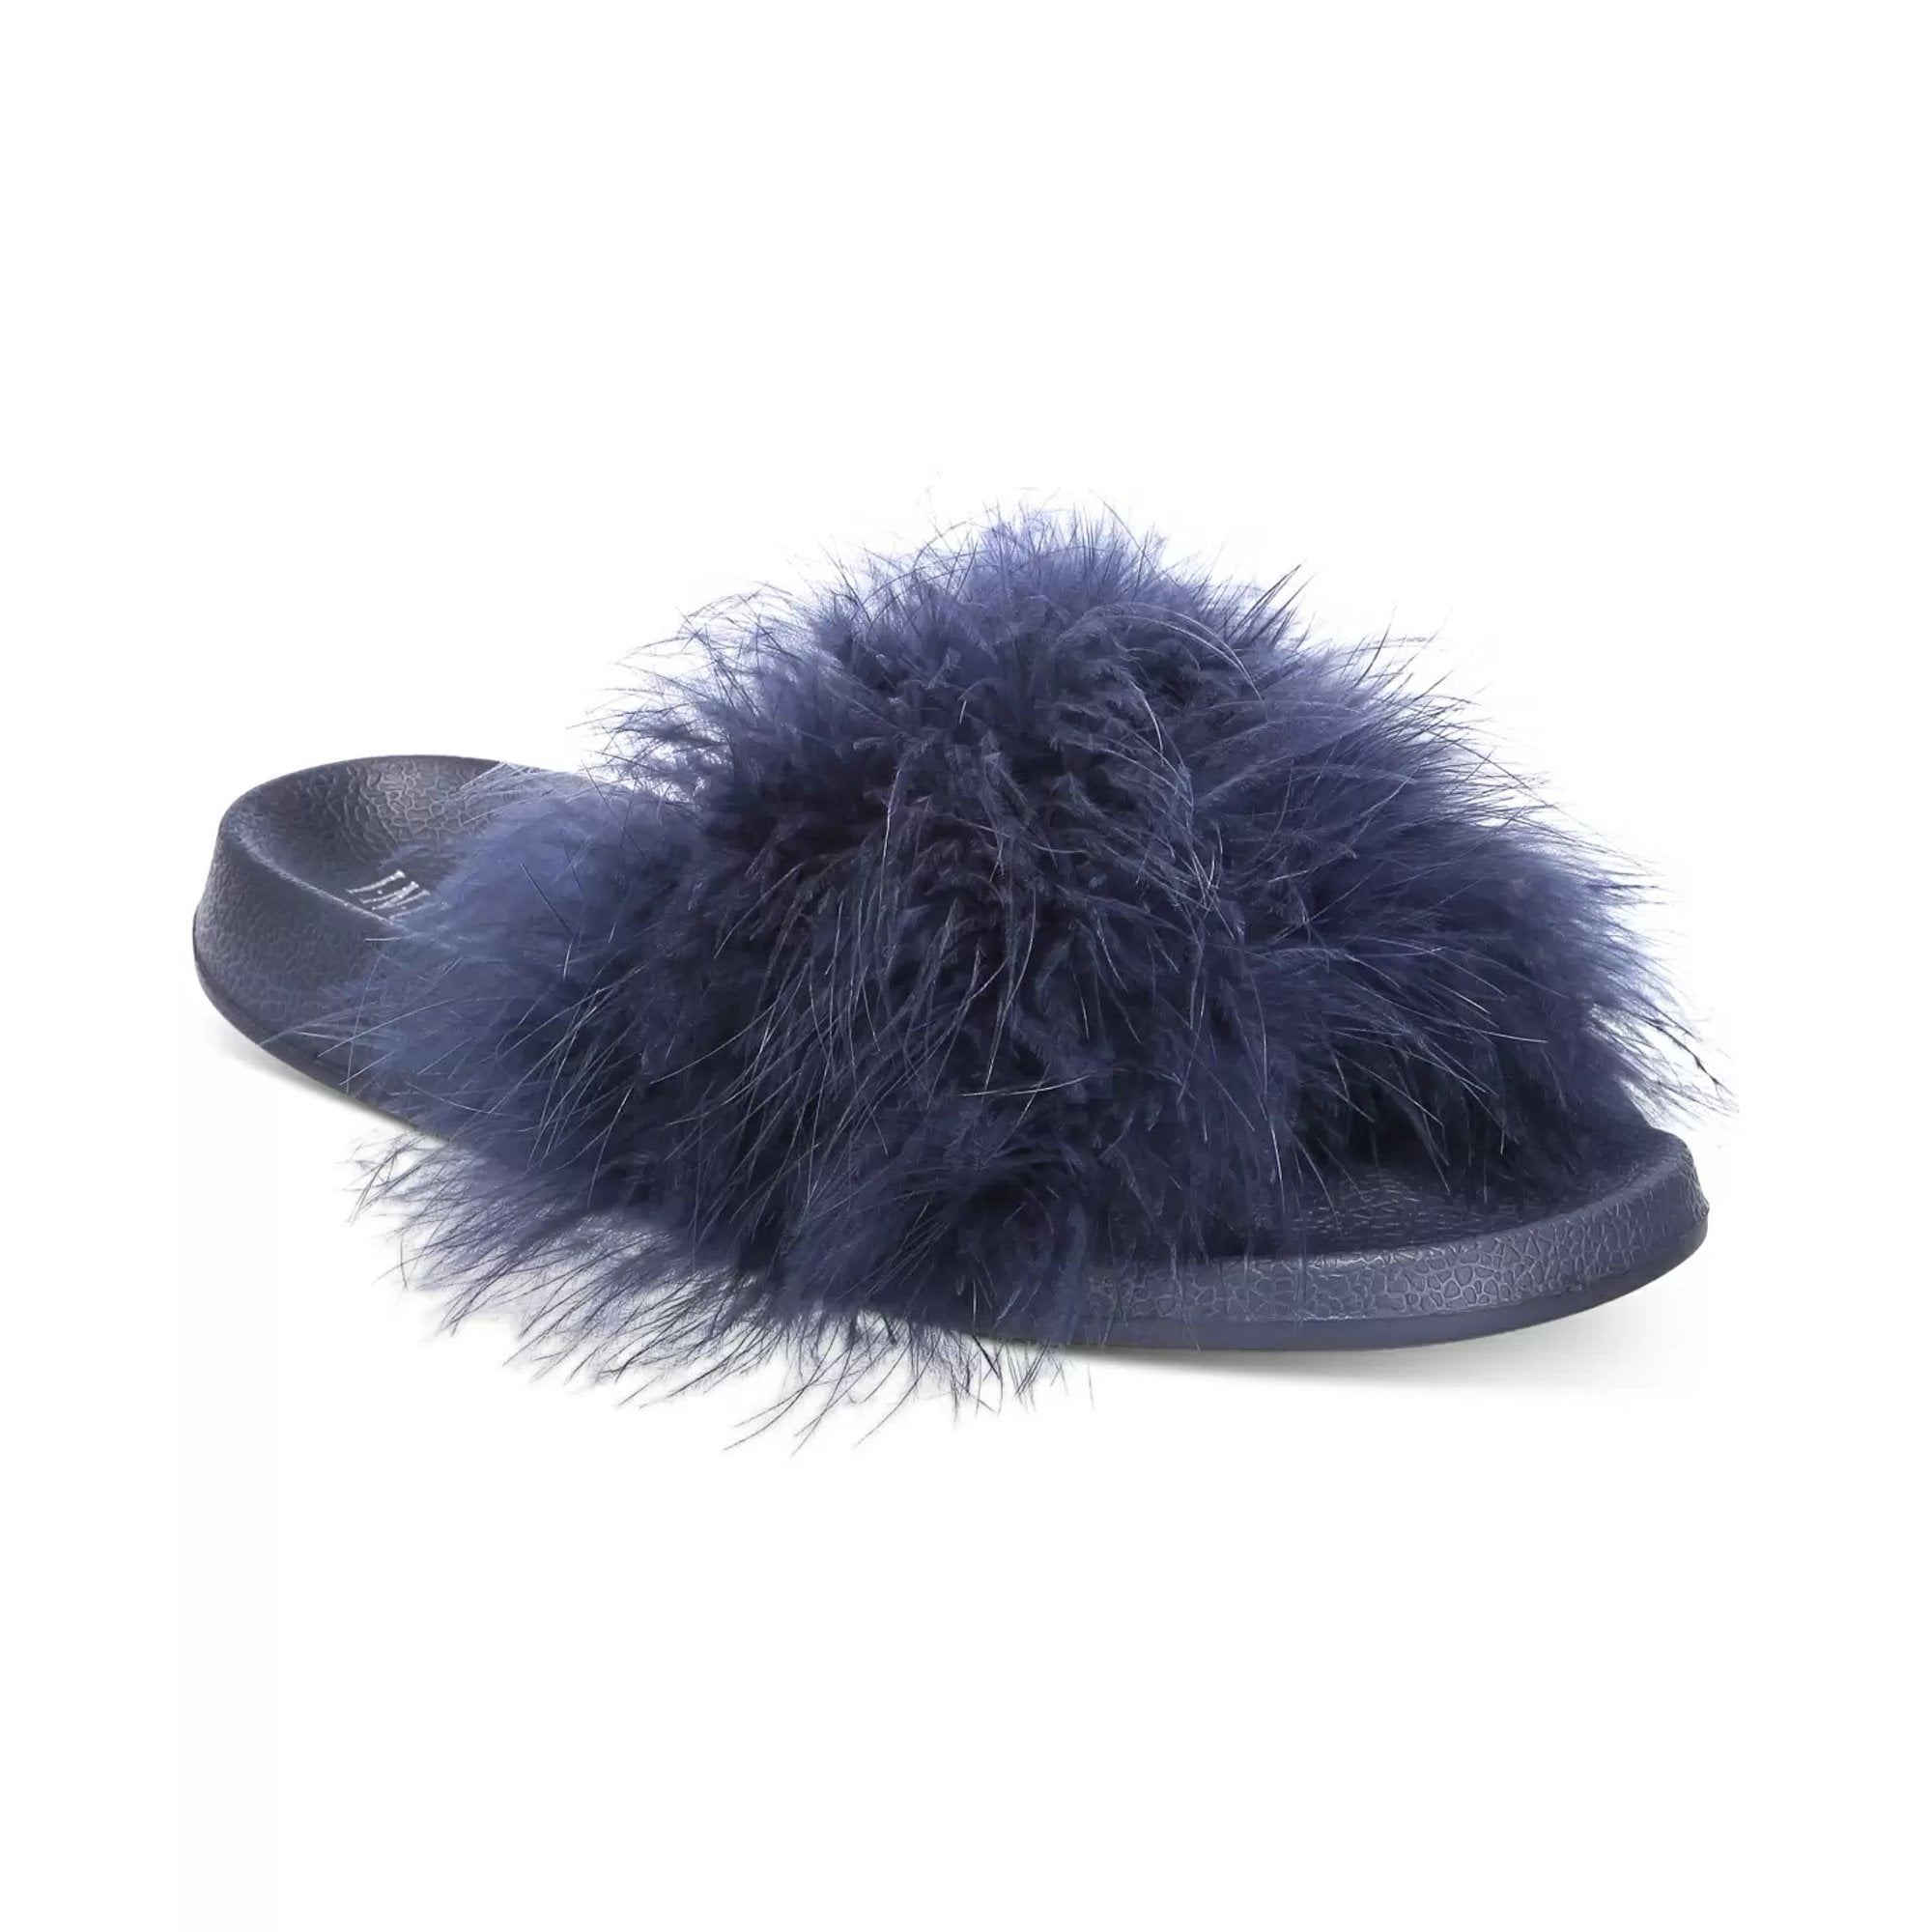 INC International Concepts Women's Feathered Bedroom Marabou Pool ...